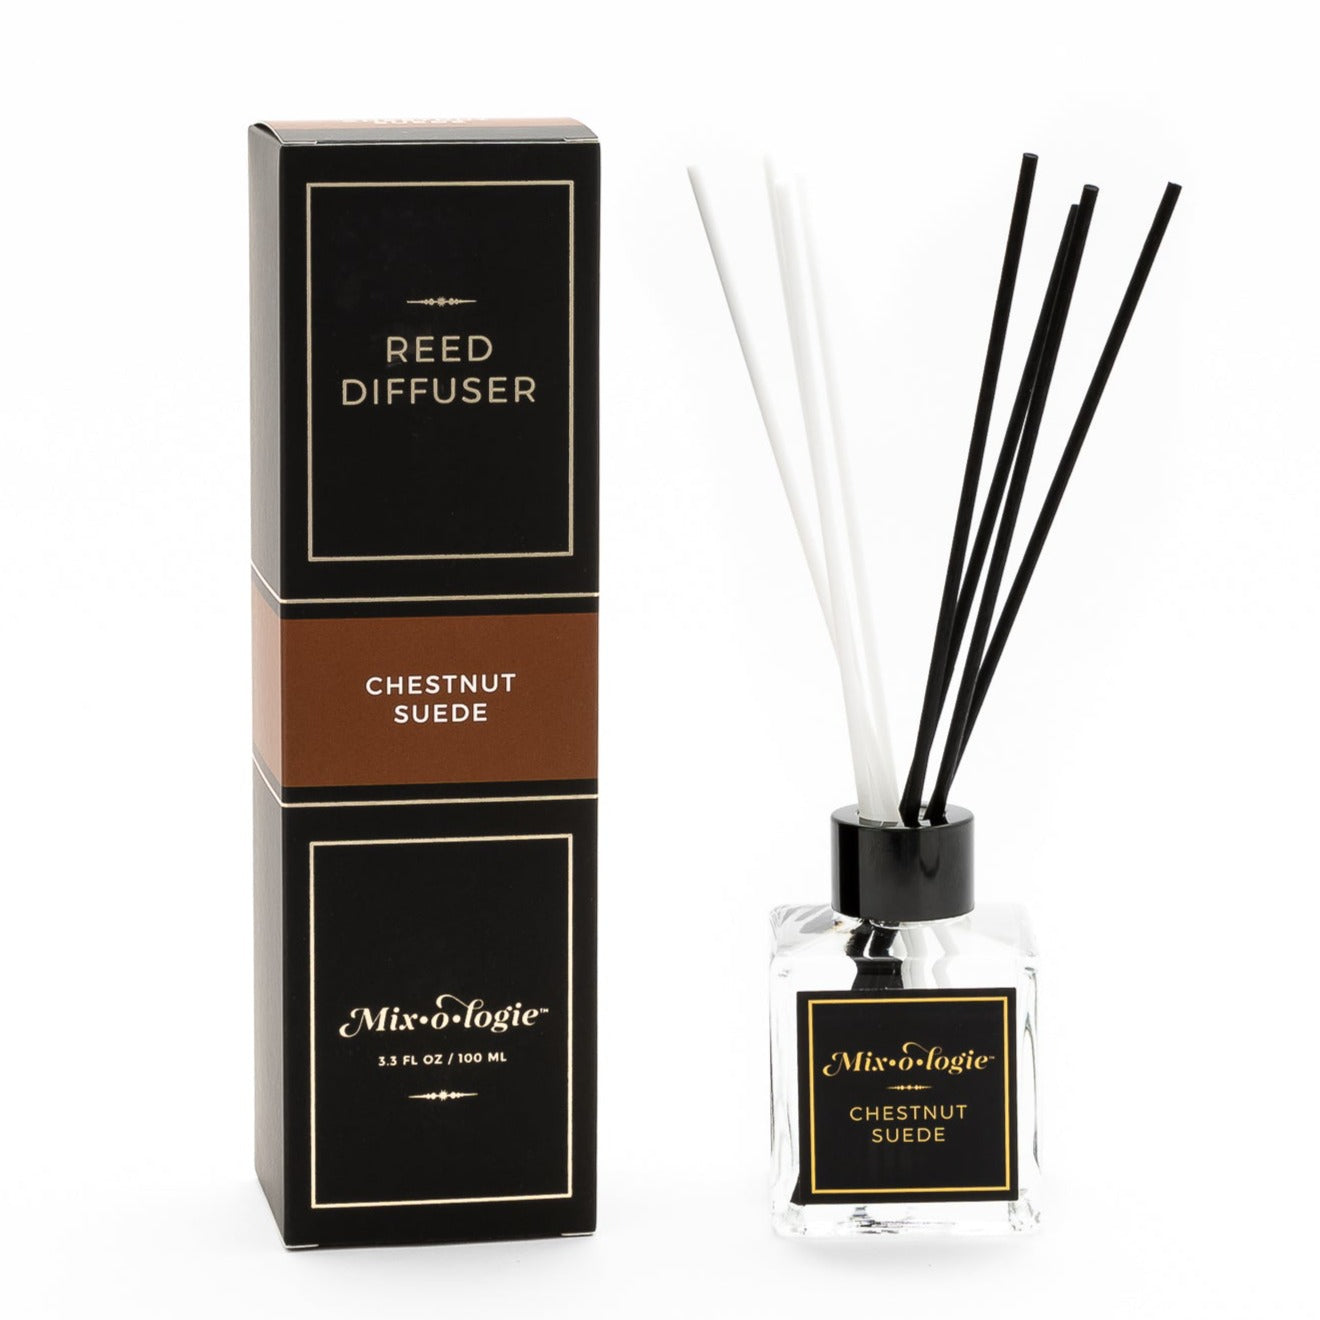 Chestnut Suede Reed Diffuser is a clear square glass container with black label that says Mixologie – Chestnut Suede. Has a black top and 4 white & 4 black reed sticks coming out of top, is 3.3 fl oz or 100 mL of clear scented liquid. Black rectangle package box with brown label. Box and diffuser are pictured with white background.